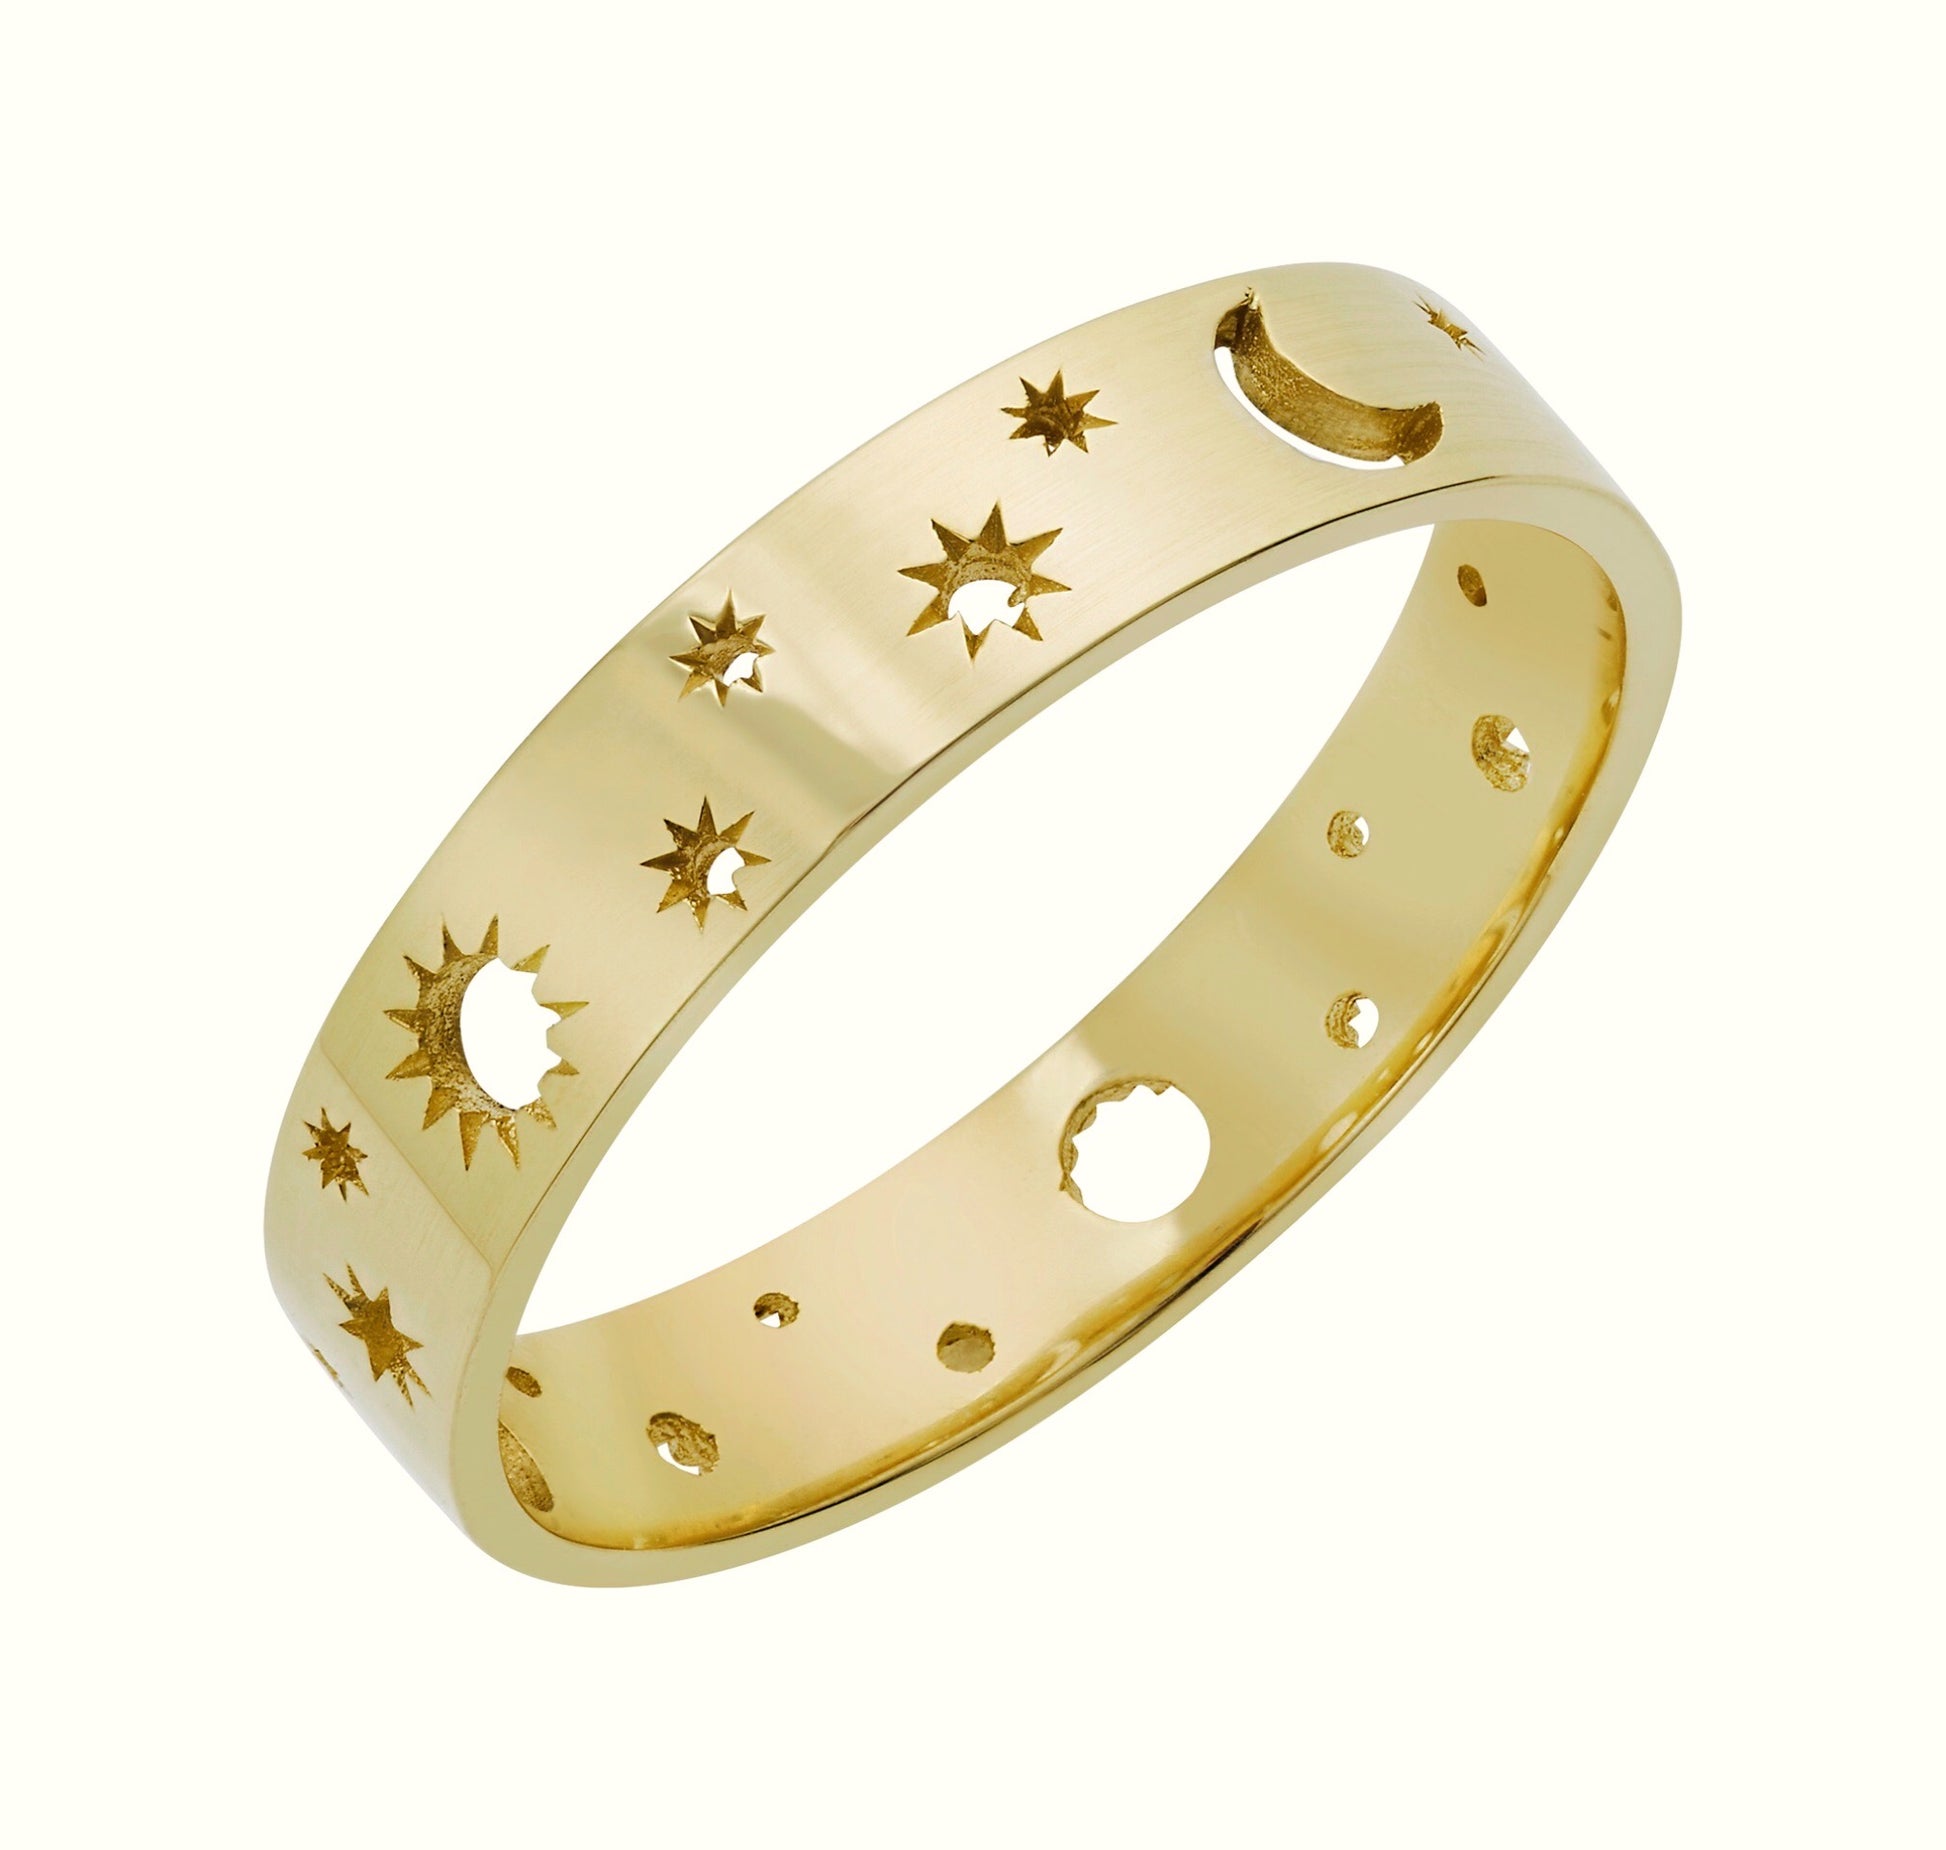 La Kaiser 10kt Celestial Band. Solid gold, sun, moon, stars design. Fine jewellery, online at Collective and Co. Exclusive